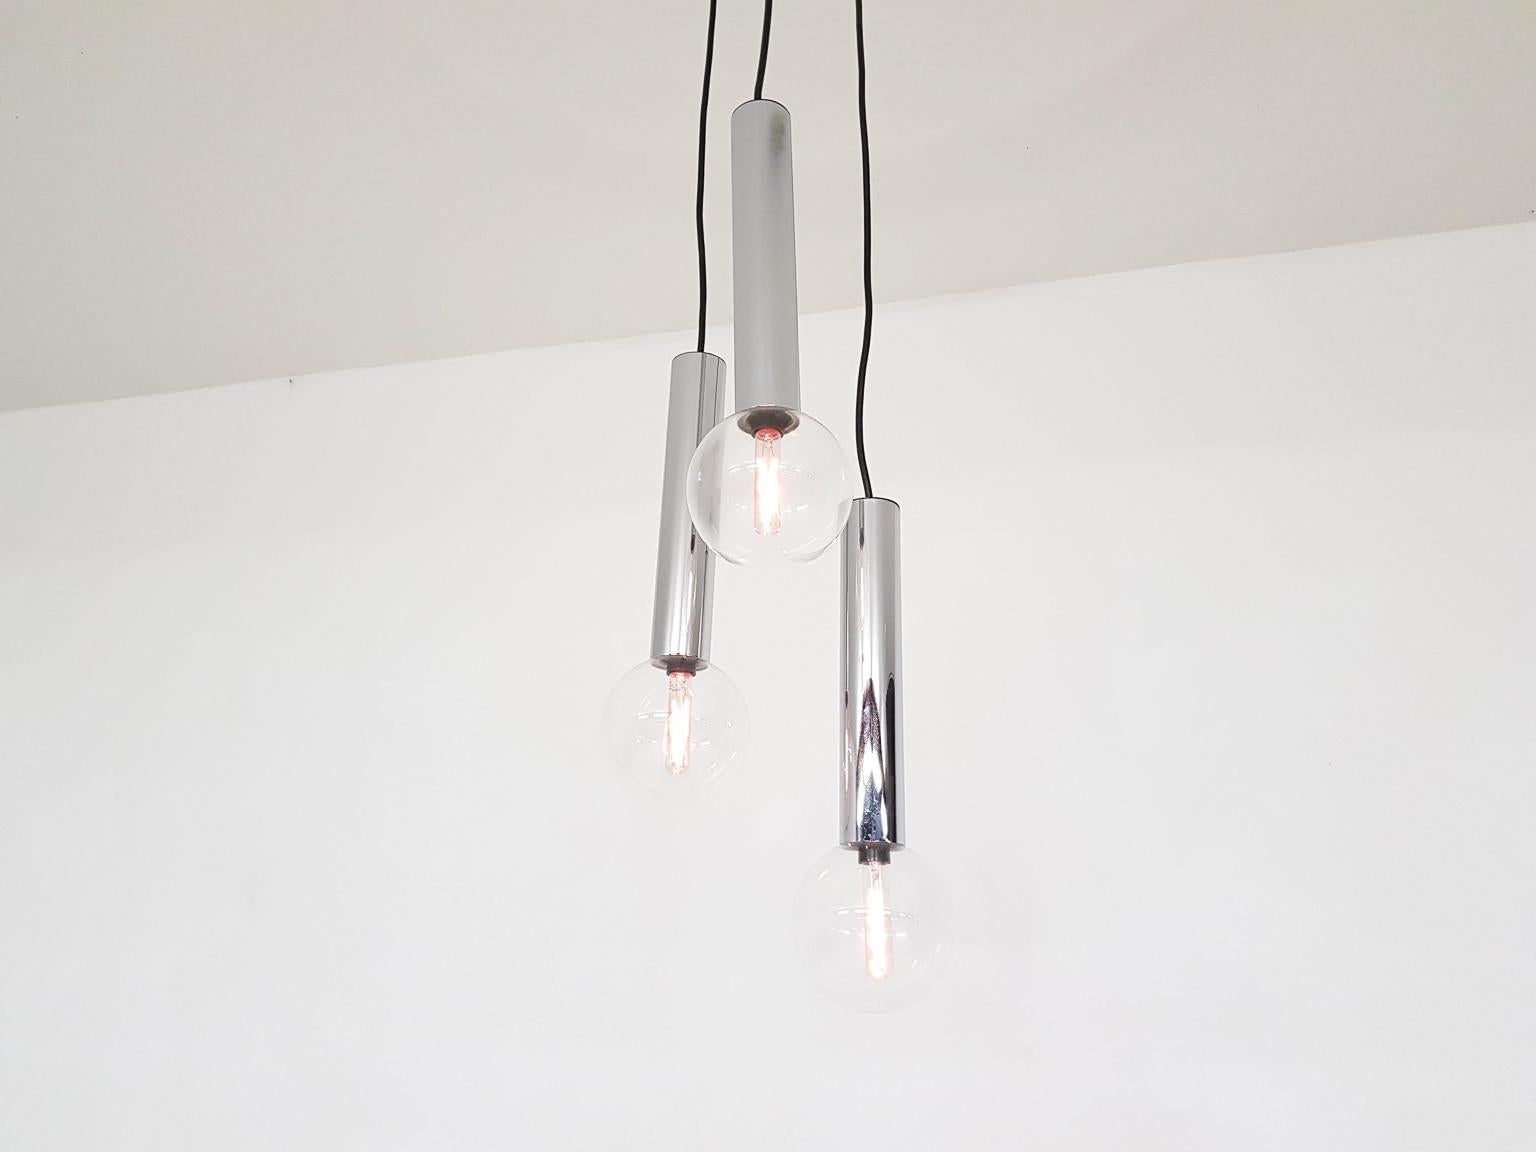 Penadant Cascade light made of 3 glass globes in chrome tubes by Motoko Ishii for Staff Leuchten, made in Germany in the 1960s.

Mid-century pendant comes with the original lighting bulbs. These bulbs give the lamp a fantastic appearance when